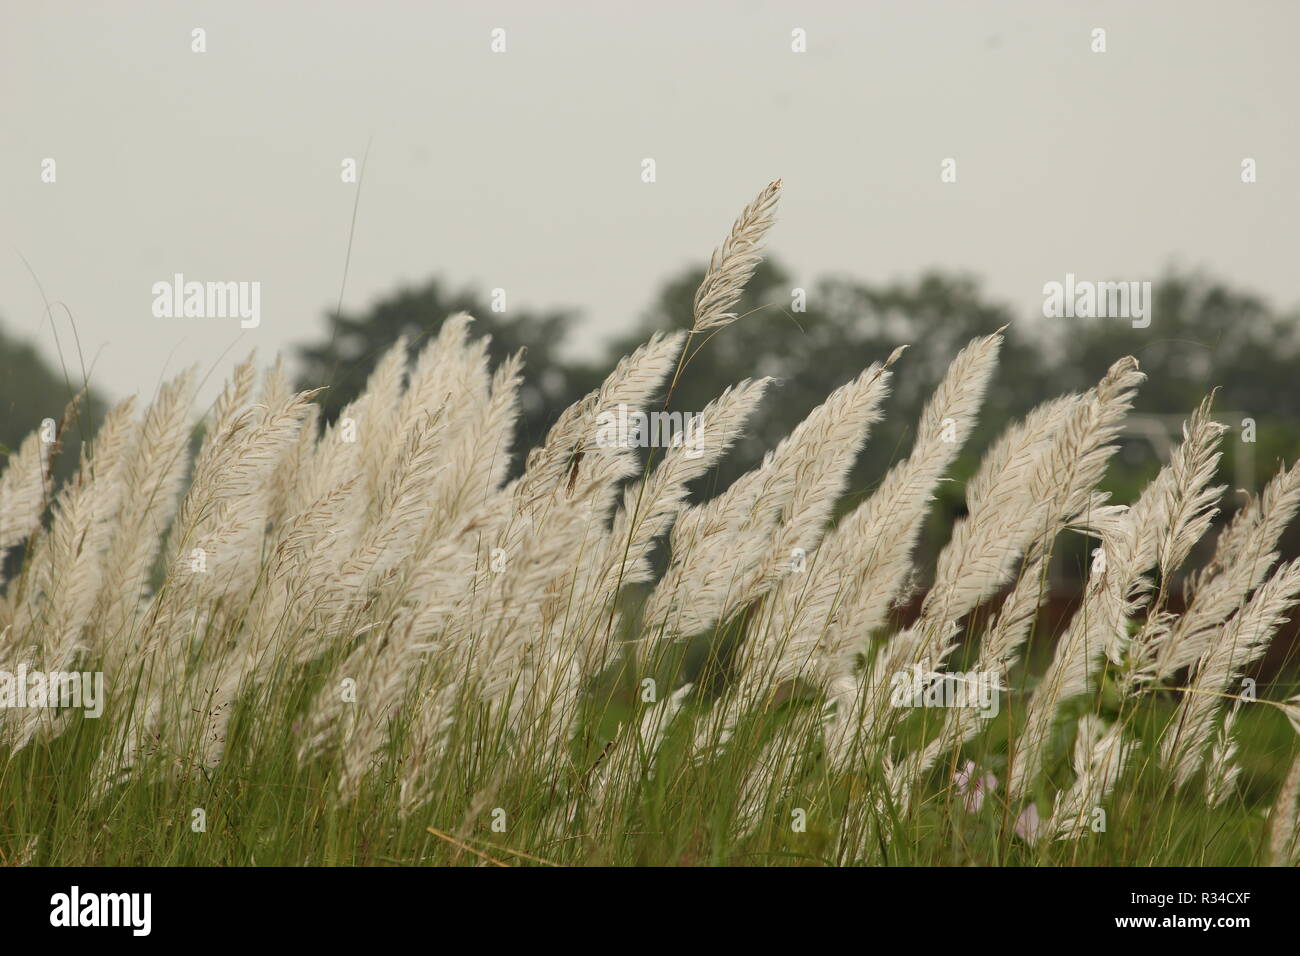 Beautiful hairy white coloured grass flower with green stem named kaasi swaying in the wind with blurred trees and sky in the background Stock Photo